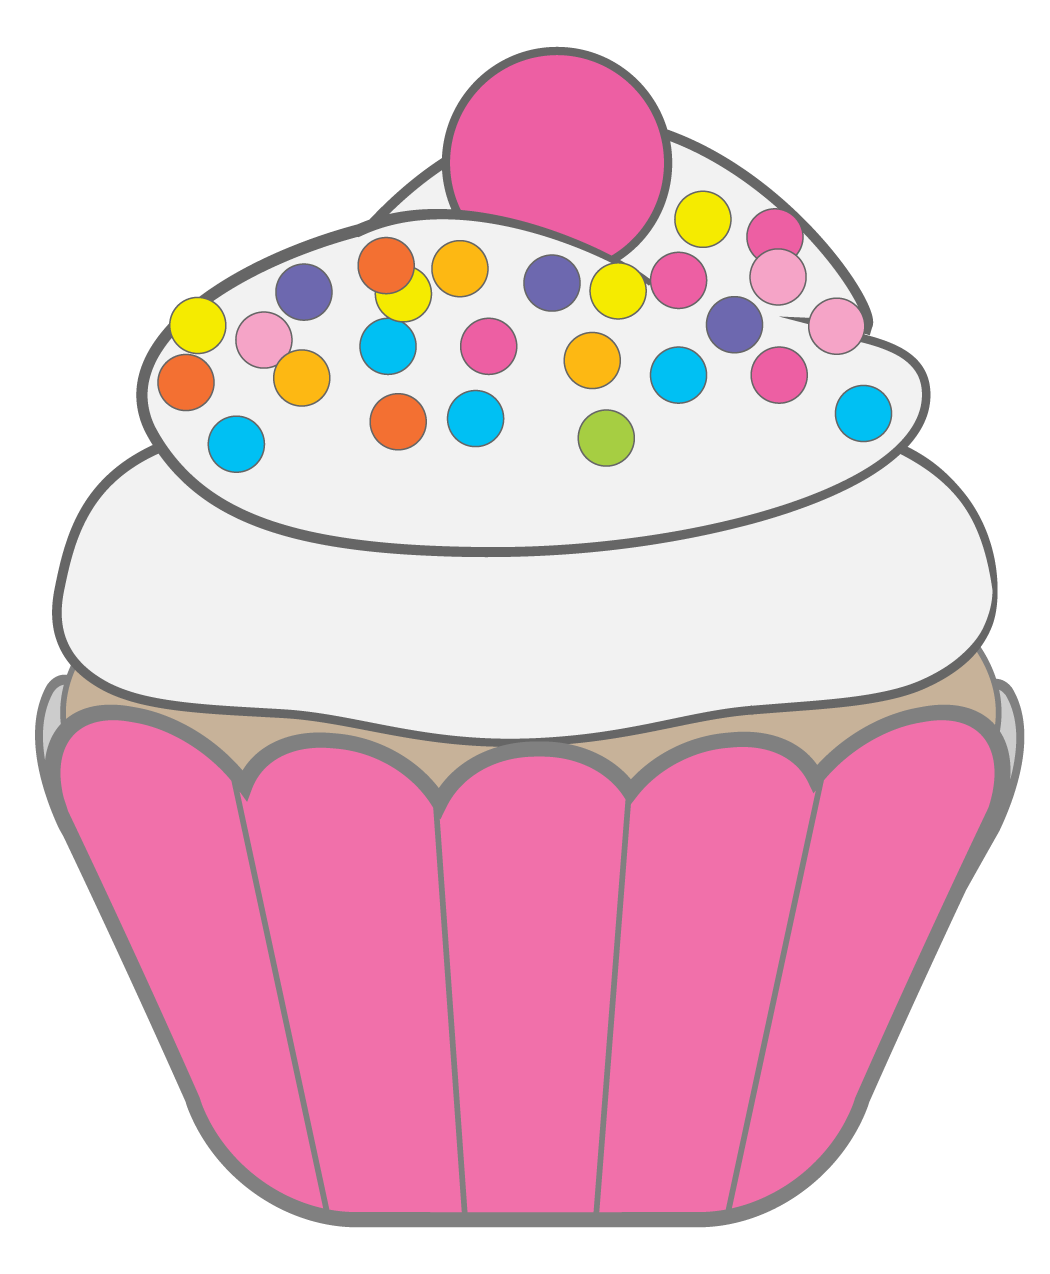 free clipart images cupcakes - photo #17